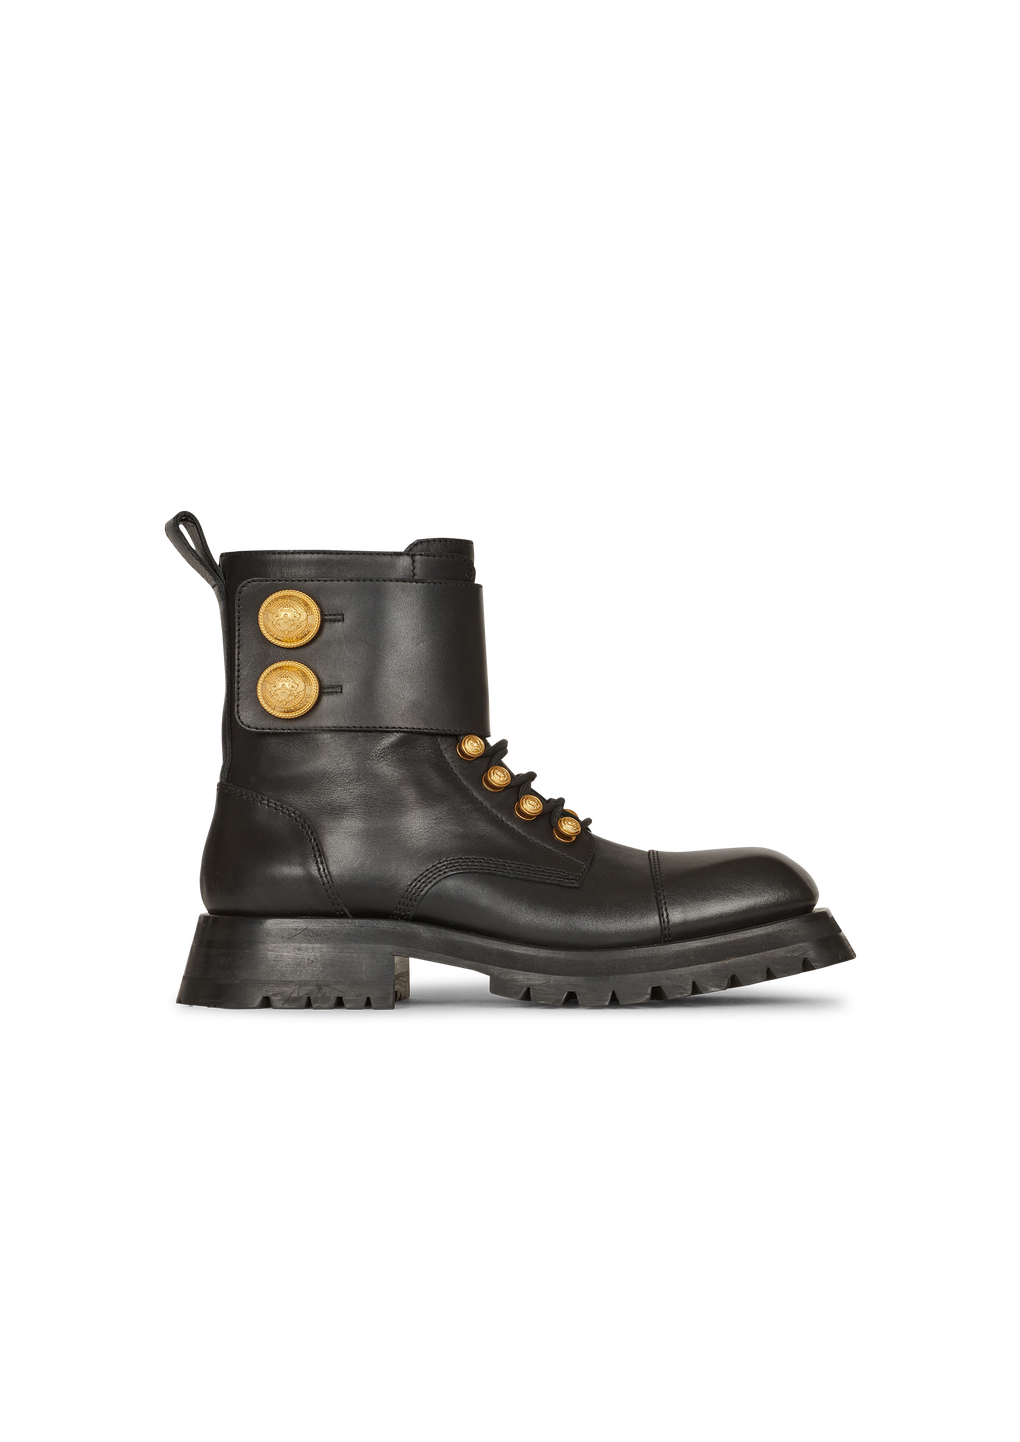 Leather Ranger Army ankle boots, black, hi-res